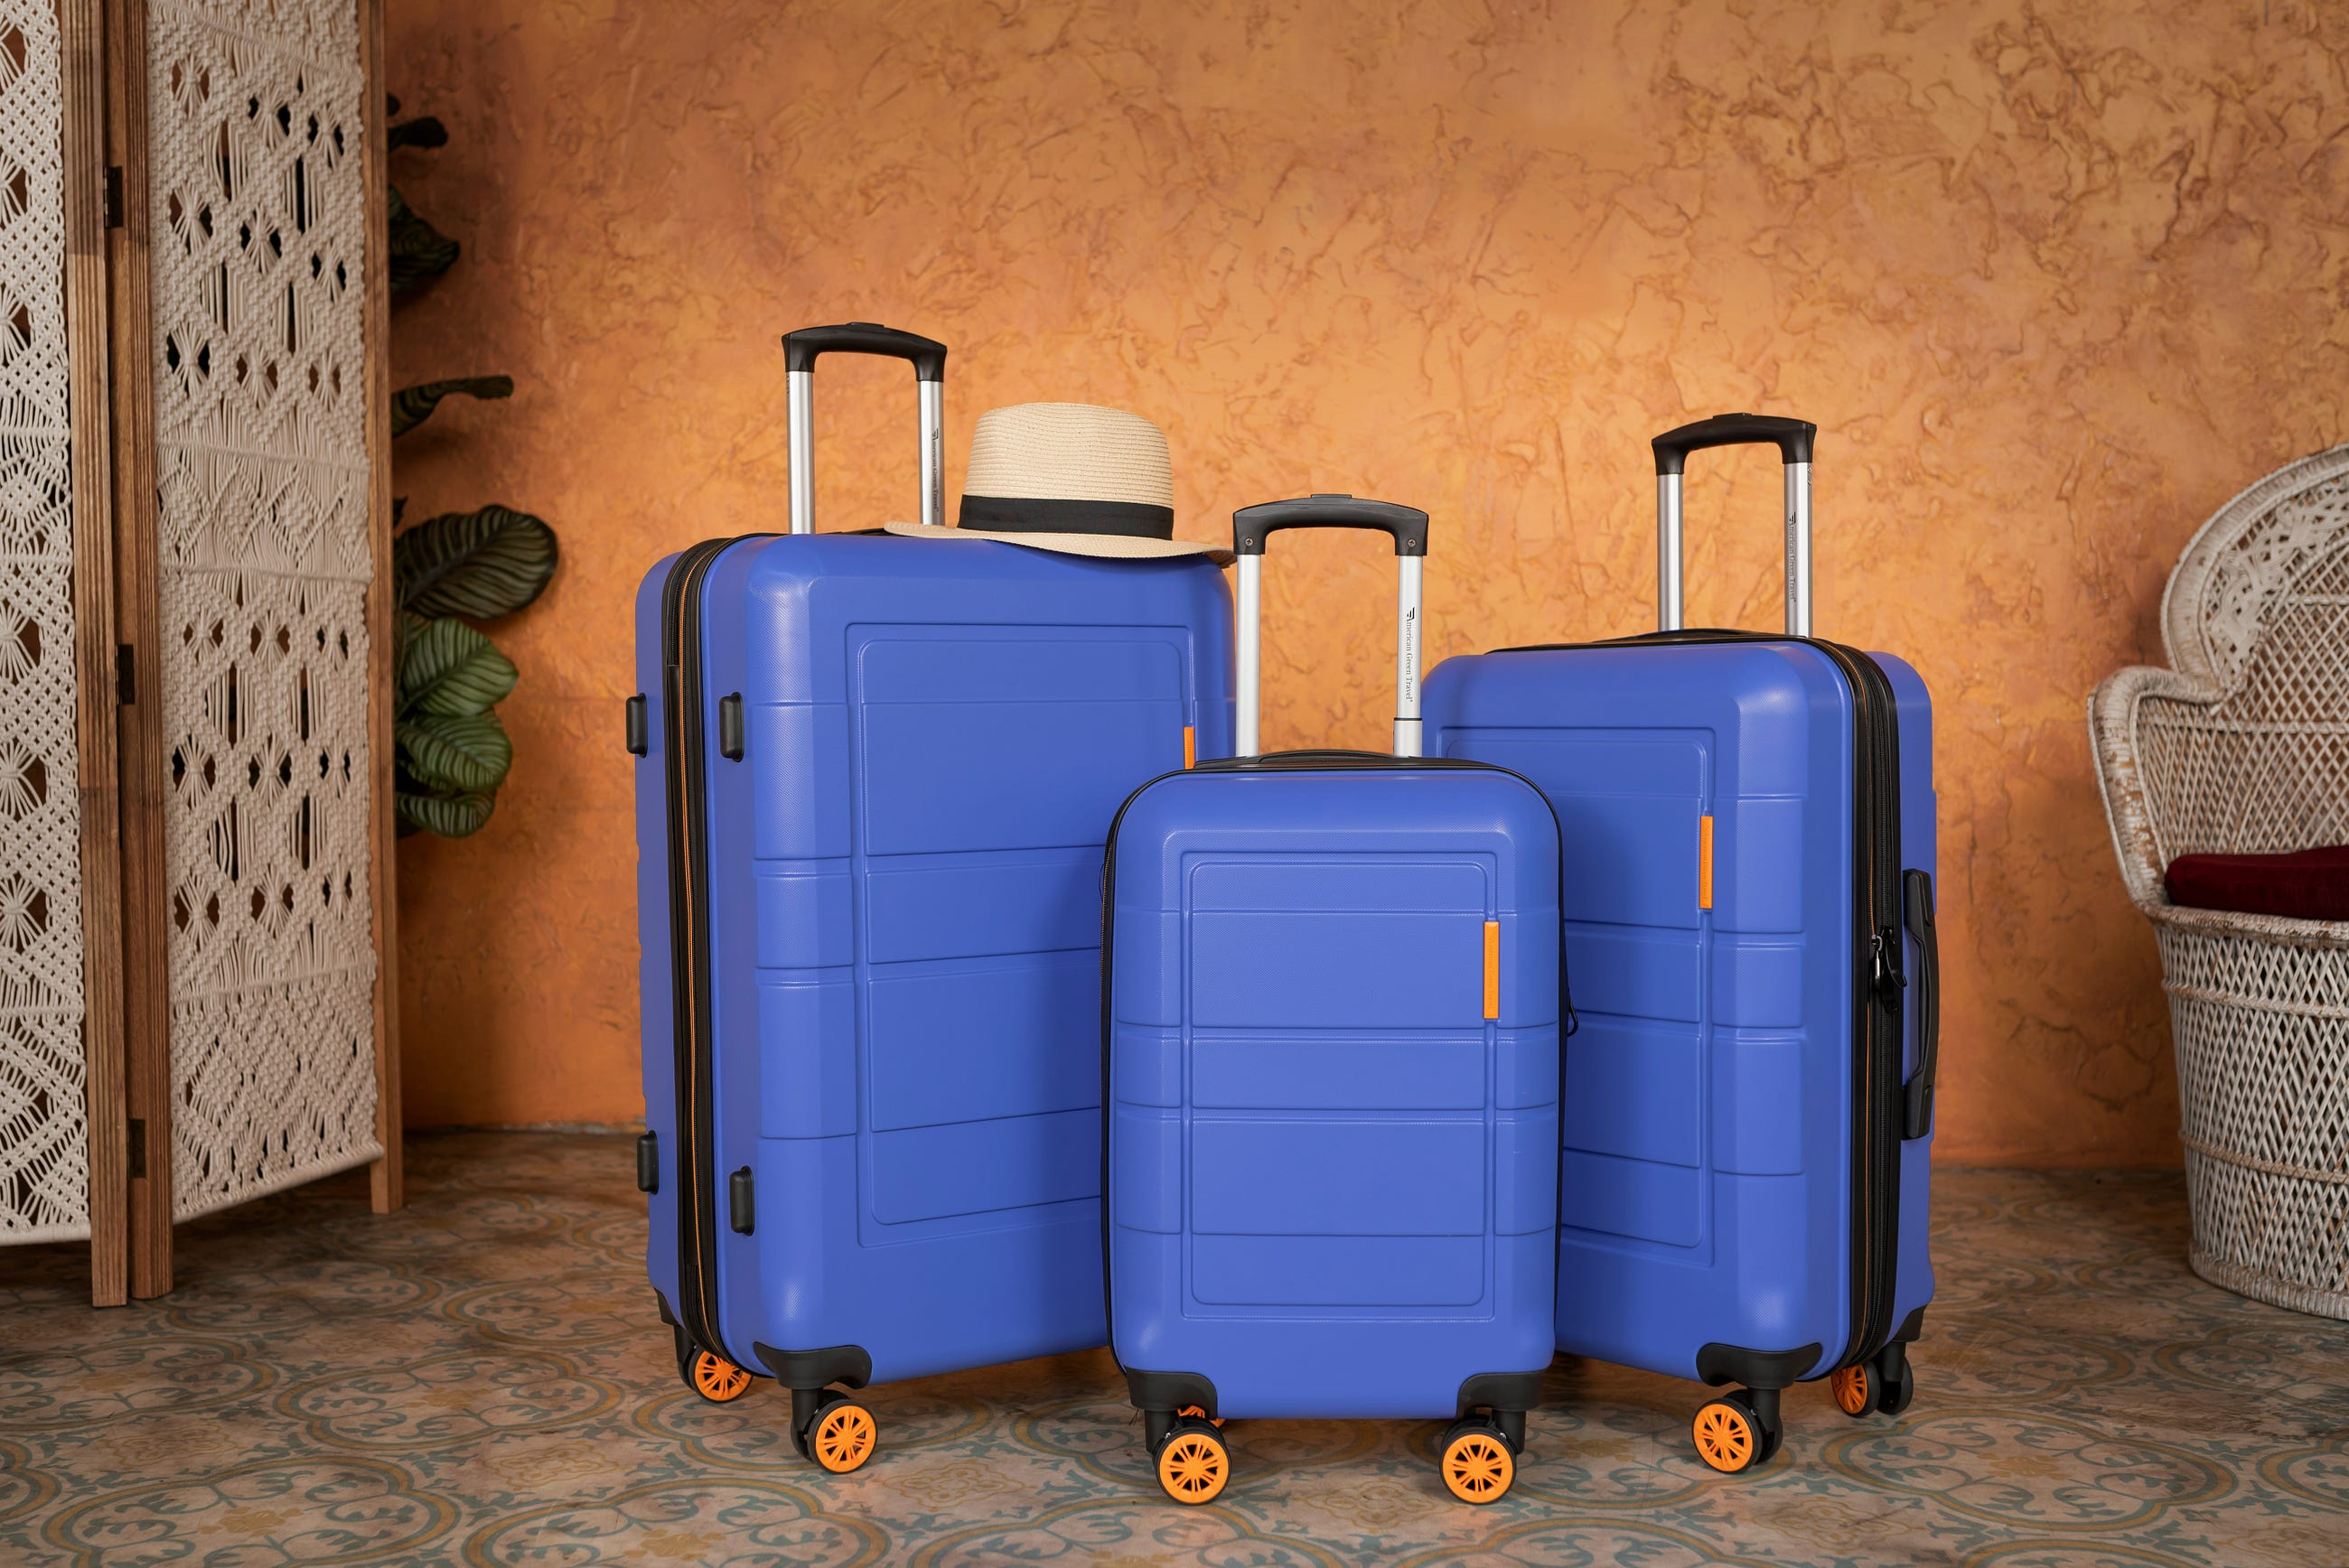 Fear Not Summer Air Travelers: You Can Avoid Losing Your Luggage